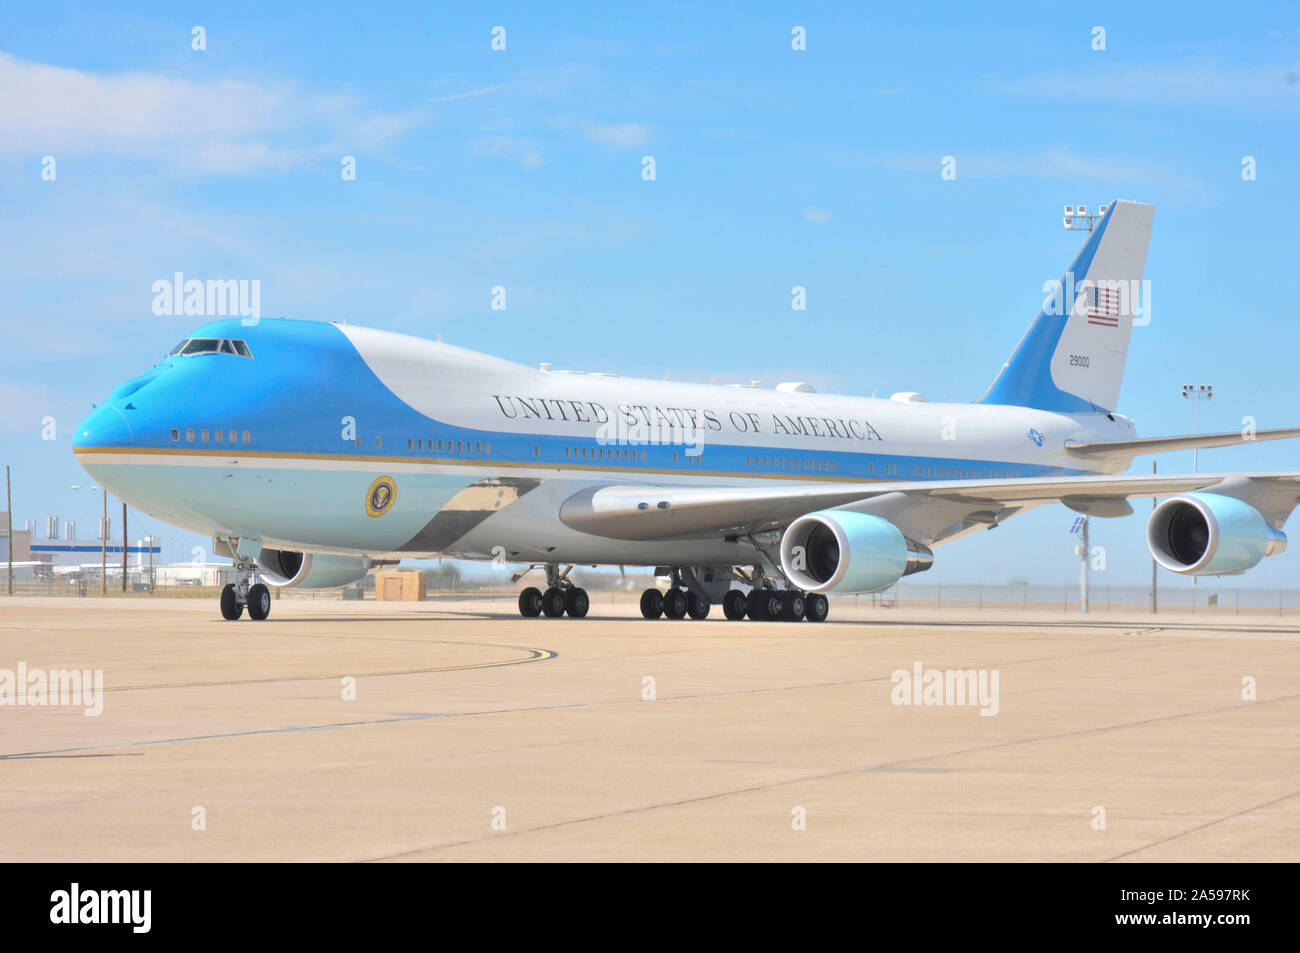 191017-N-VD165-076 FORT WORTH, Texas (Oct. 17, 2019) The Air Force One  arrived at Naval Air Station (NAS) Fort Worth Joint Reserve Base (JRB) Oct.  17, 2019 as part of a presidential visit